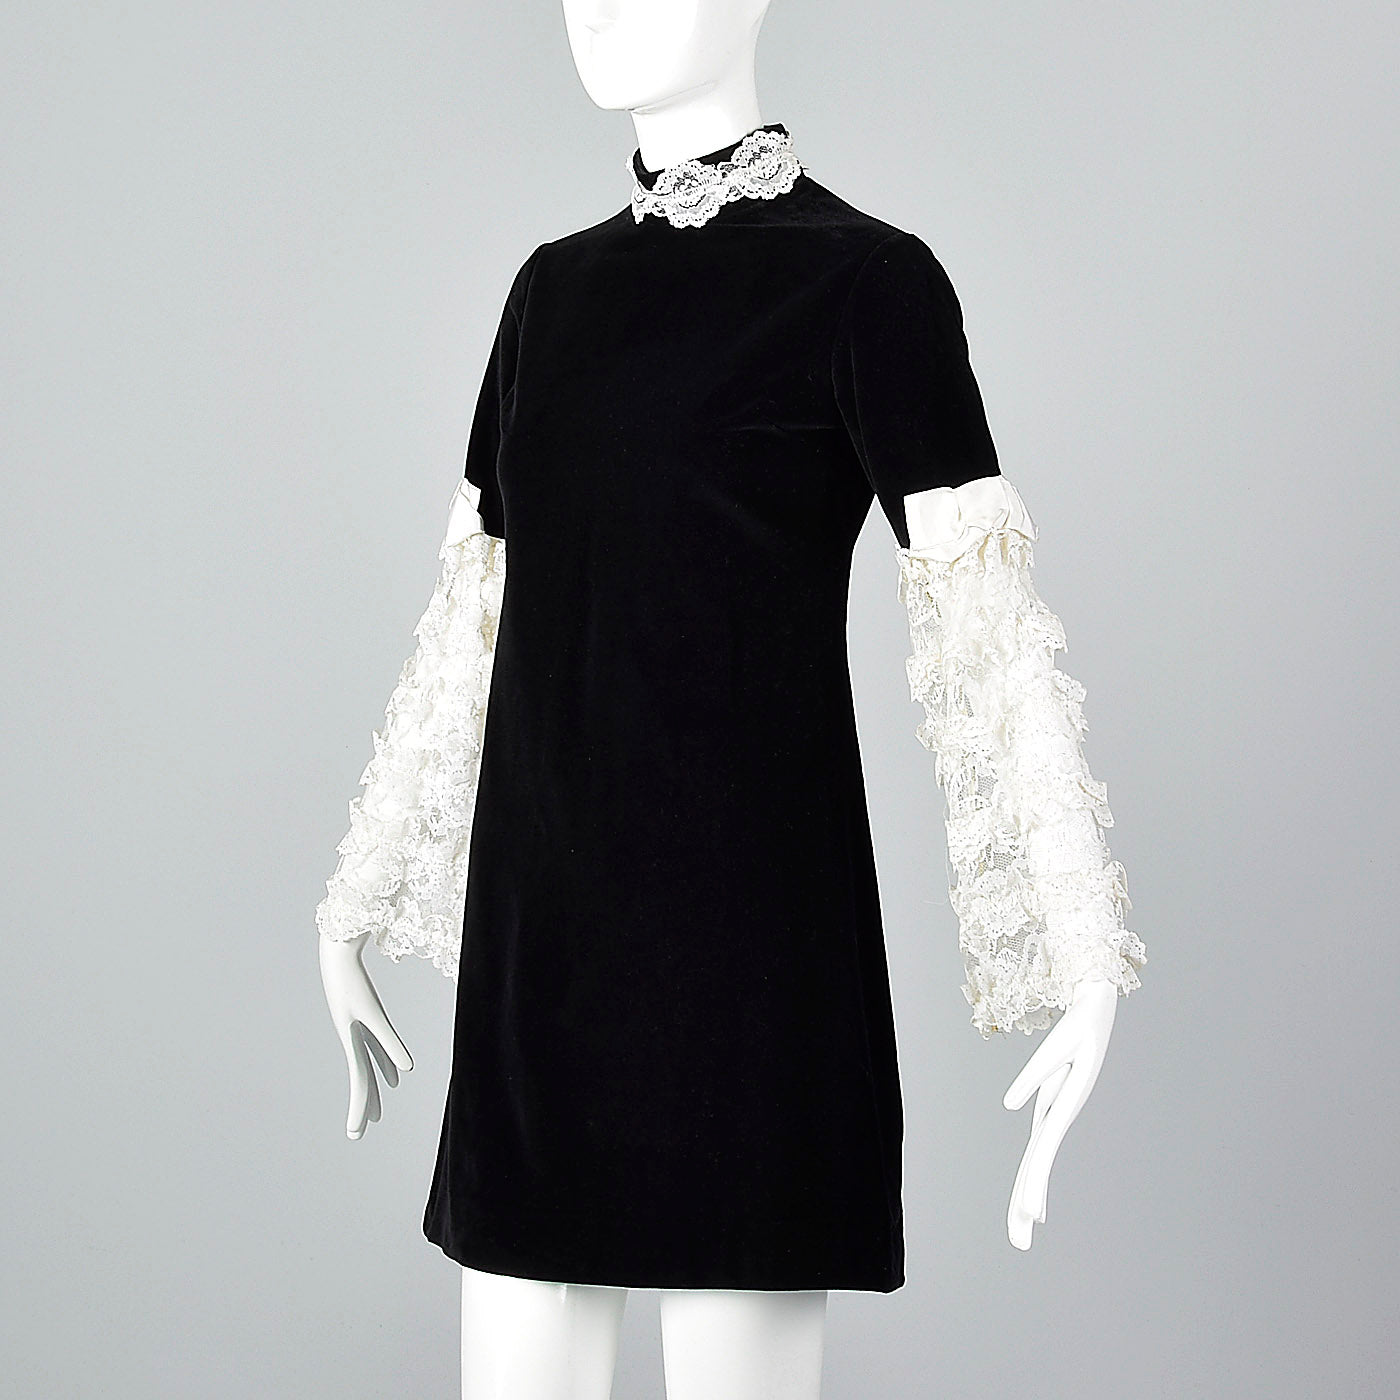 1960s Saks Fifth Avenue Black Velvet Dress with Lace Sleeves